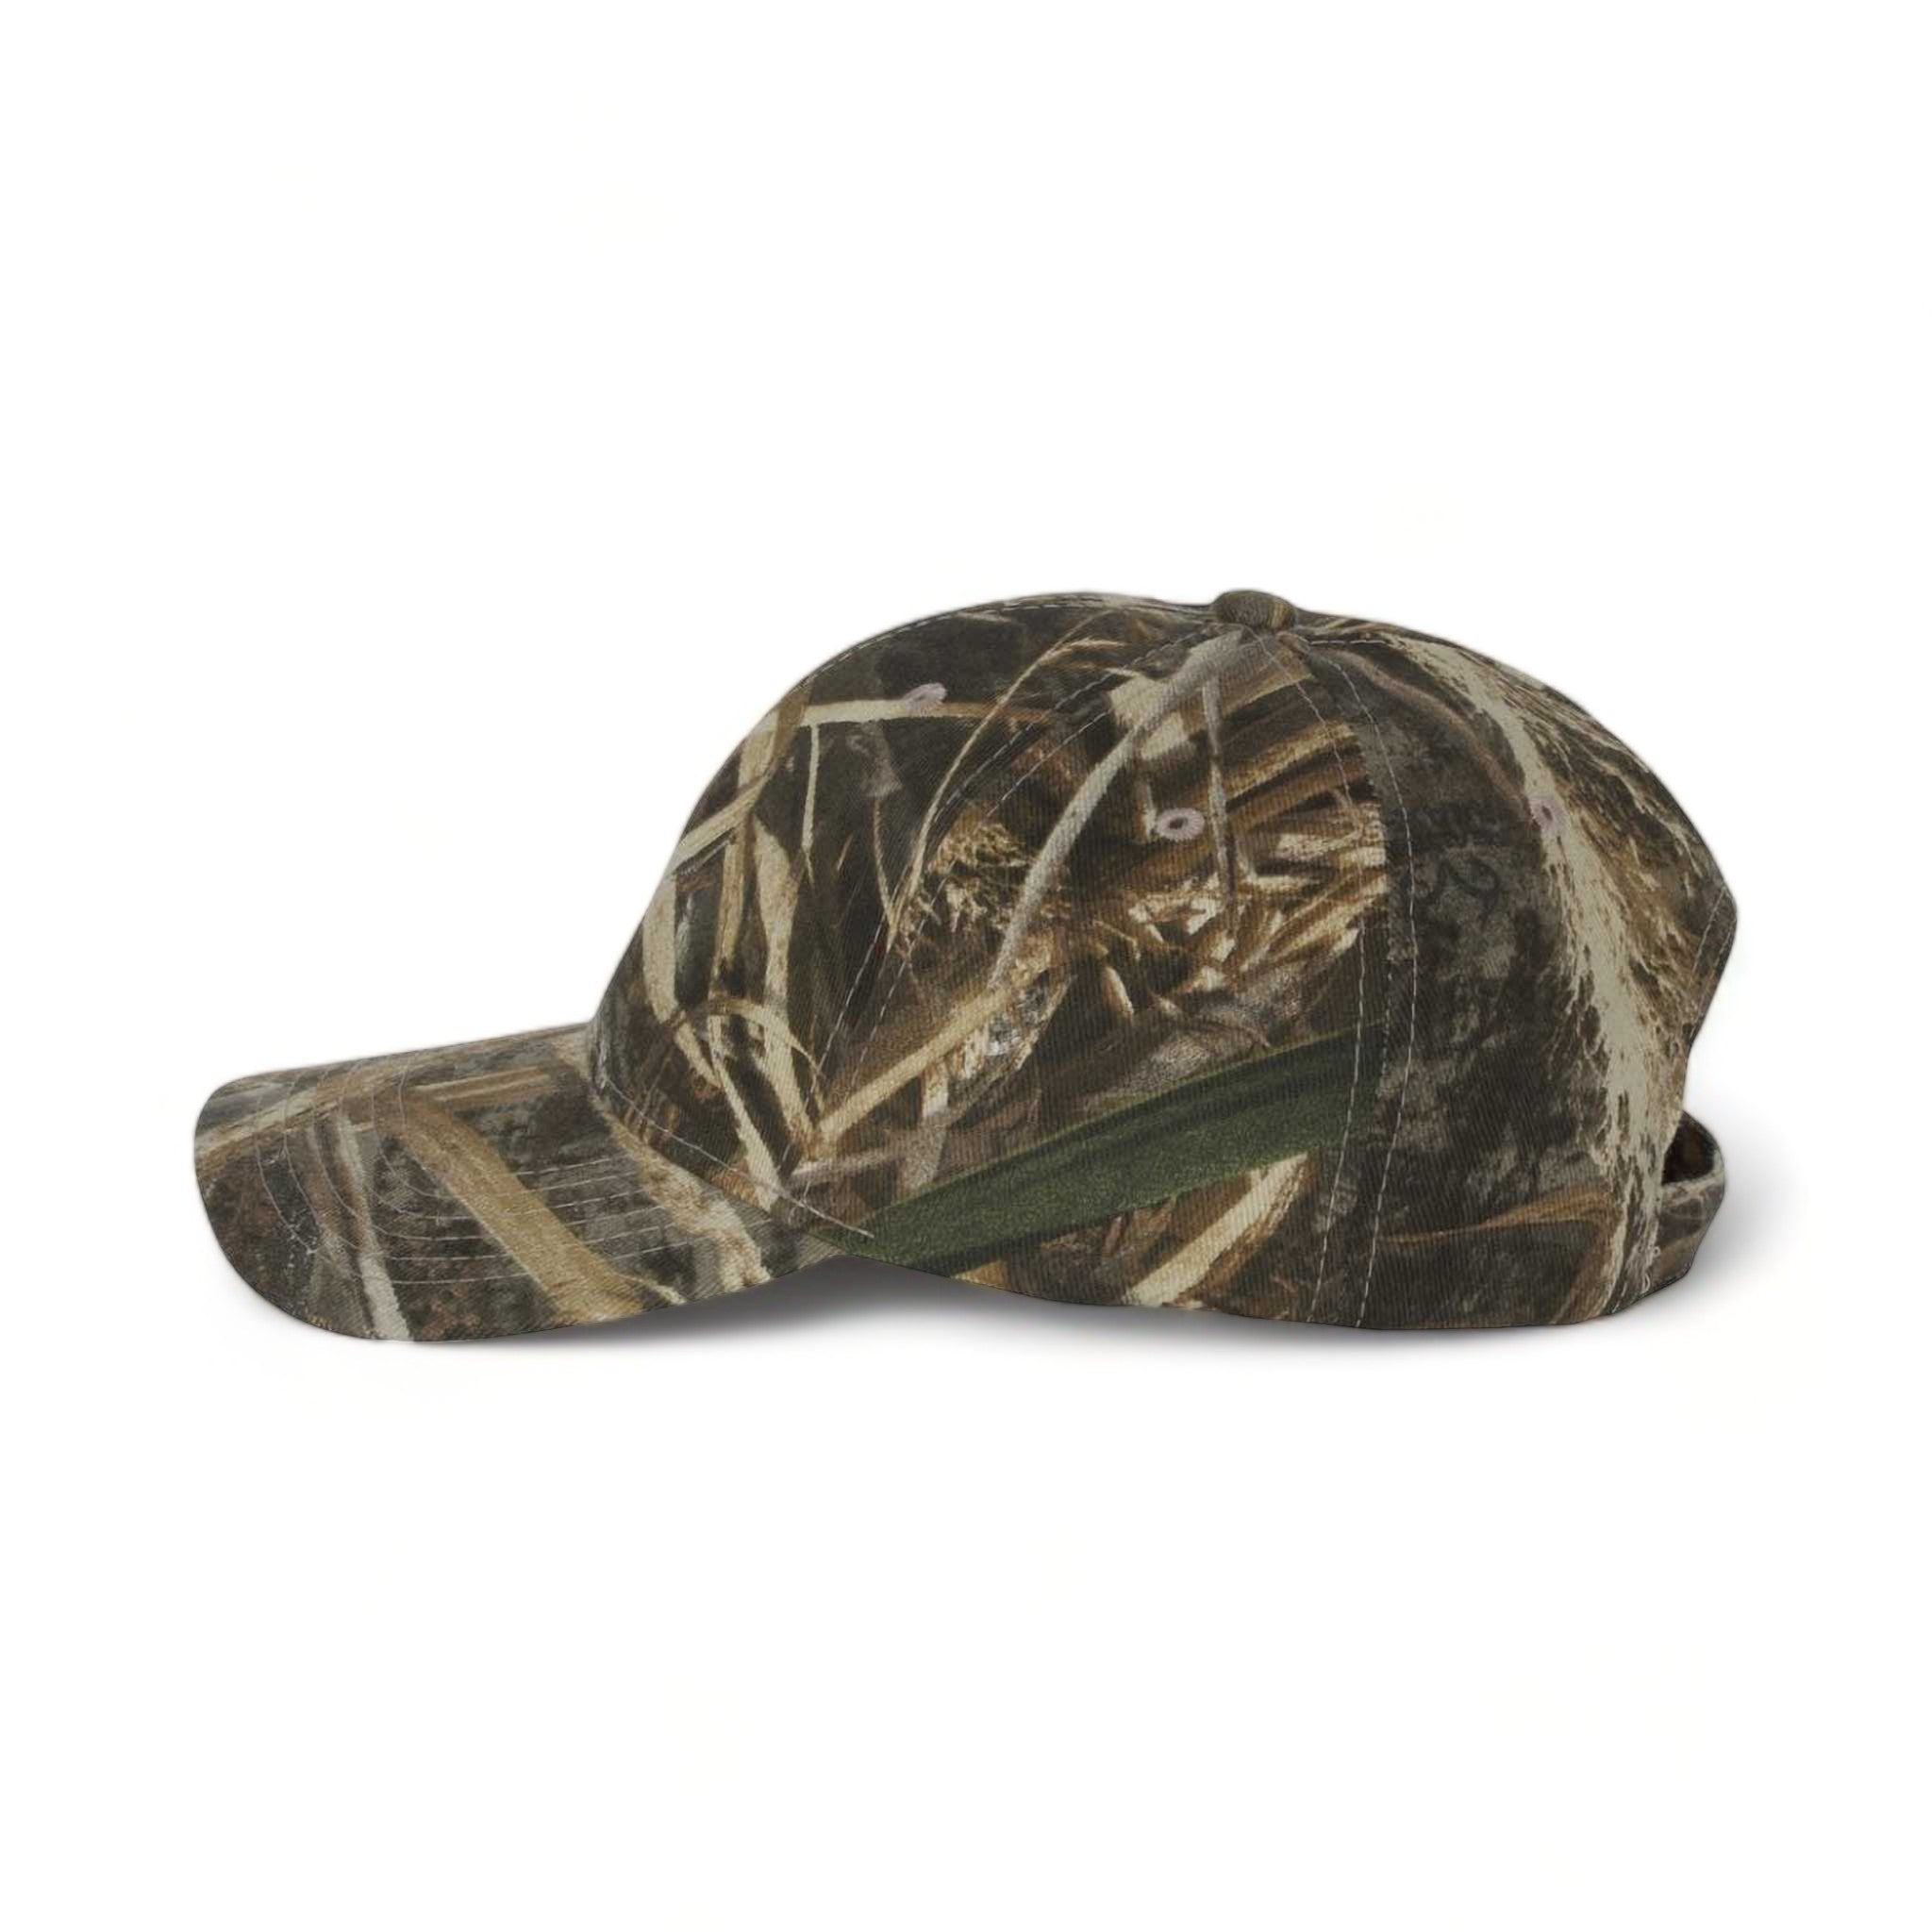 Side view of Kati LC10 custom hat in realtree max-5